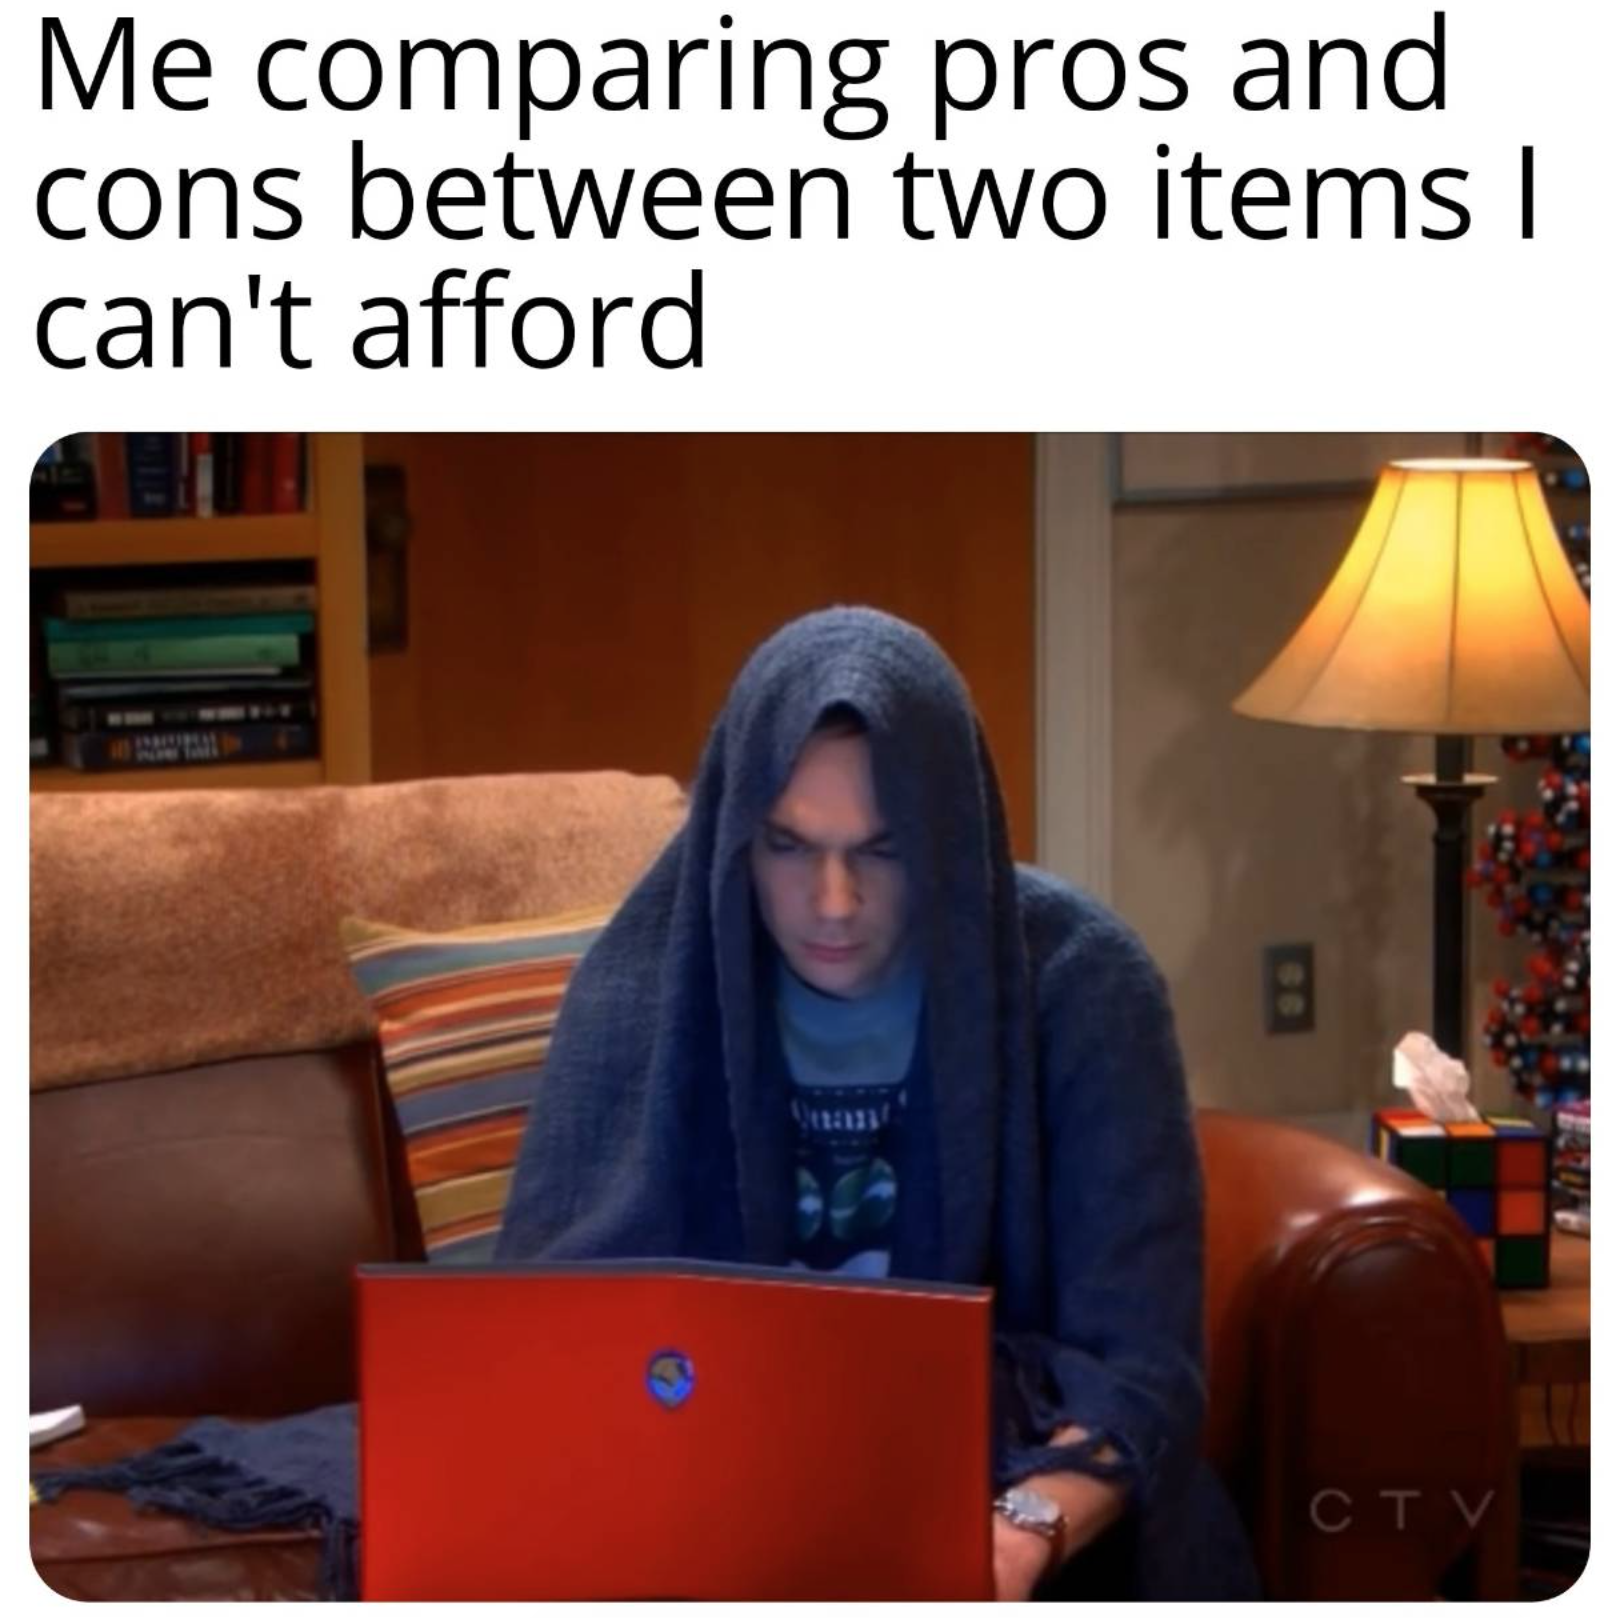 funny gaming memes - Me comparing pros and cons between two items | can't afford Ctv